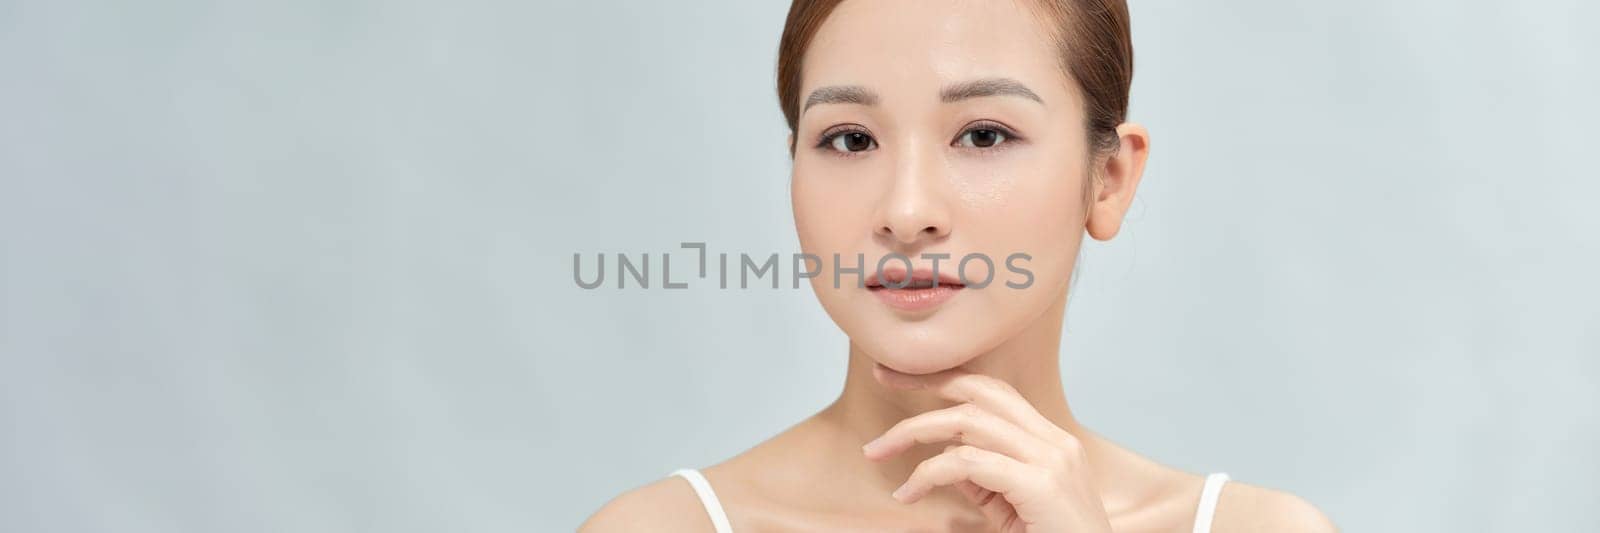 Woman with beautiful face touching healthy facial skin portrait on banner background